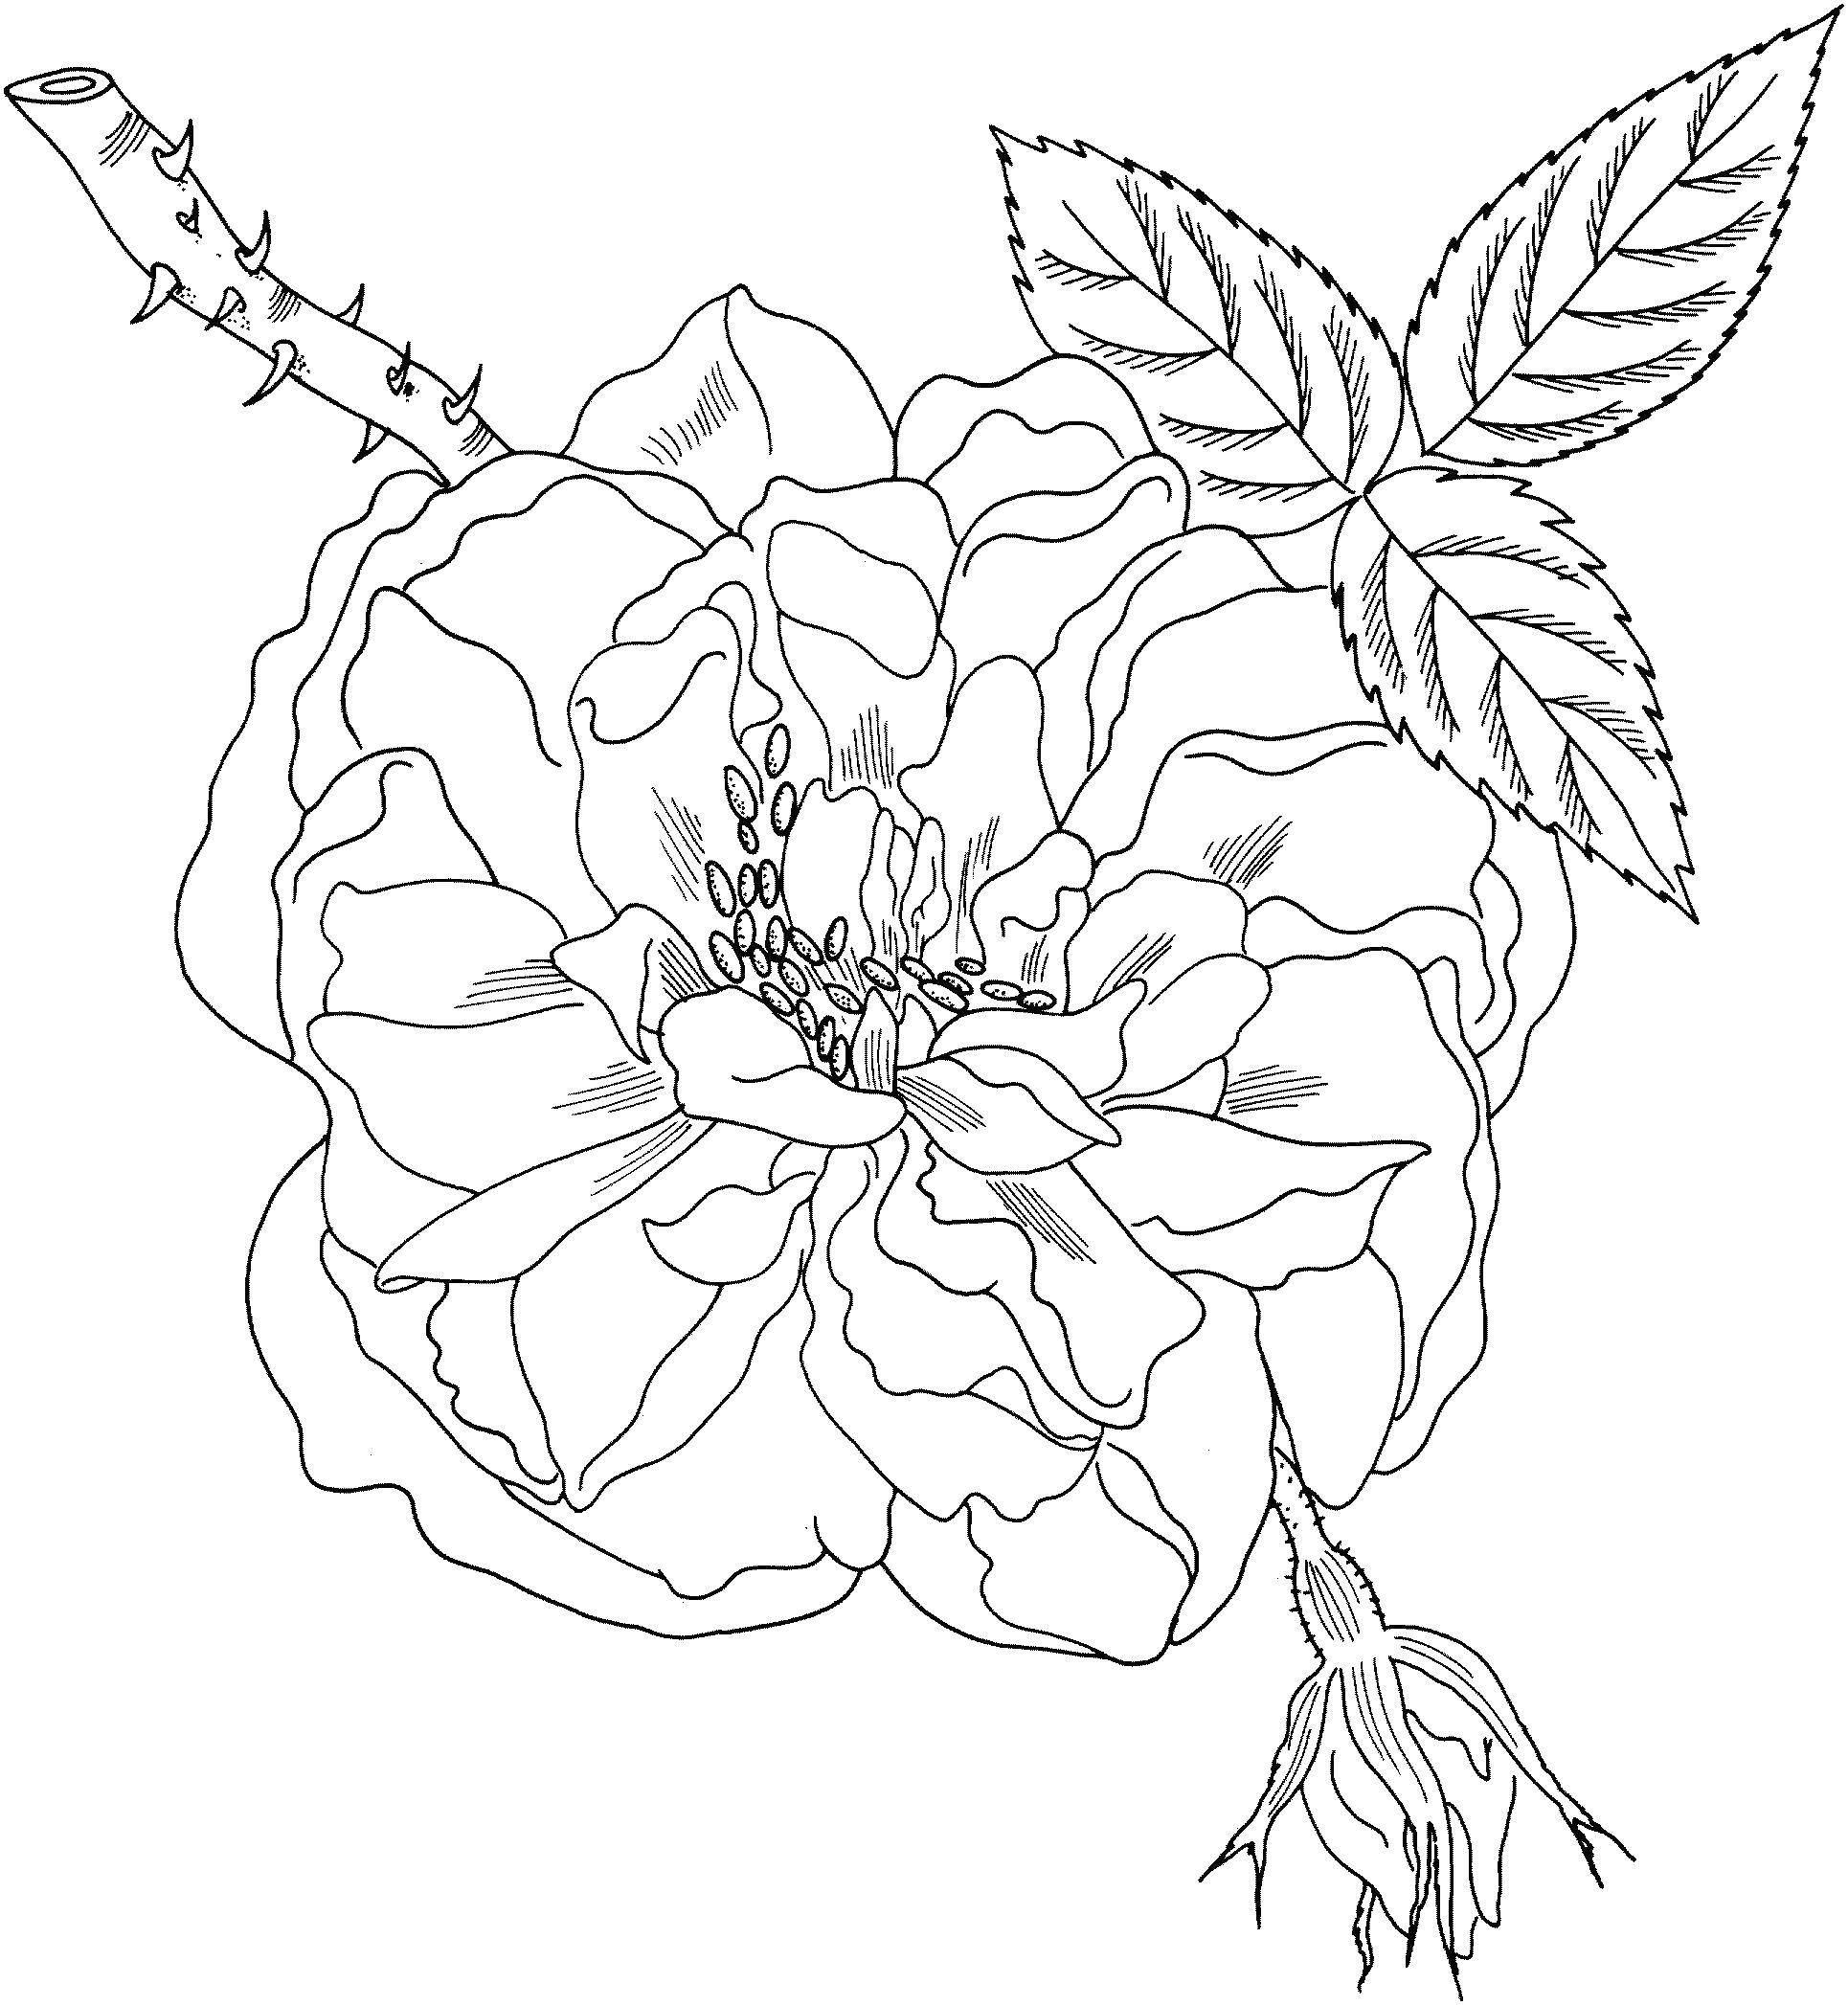 Coloring Rose with thorns. Category flowers. Tags:  rose, thorns, leaves.